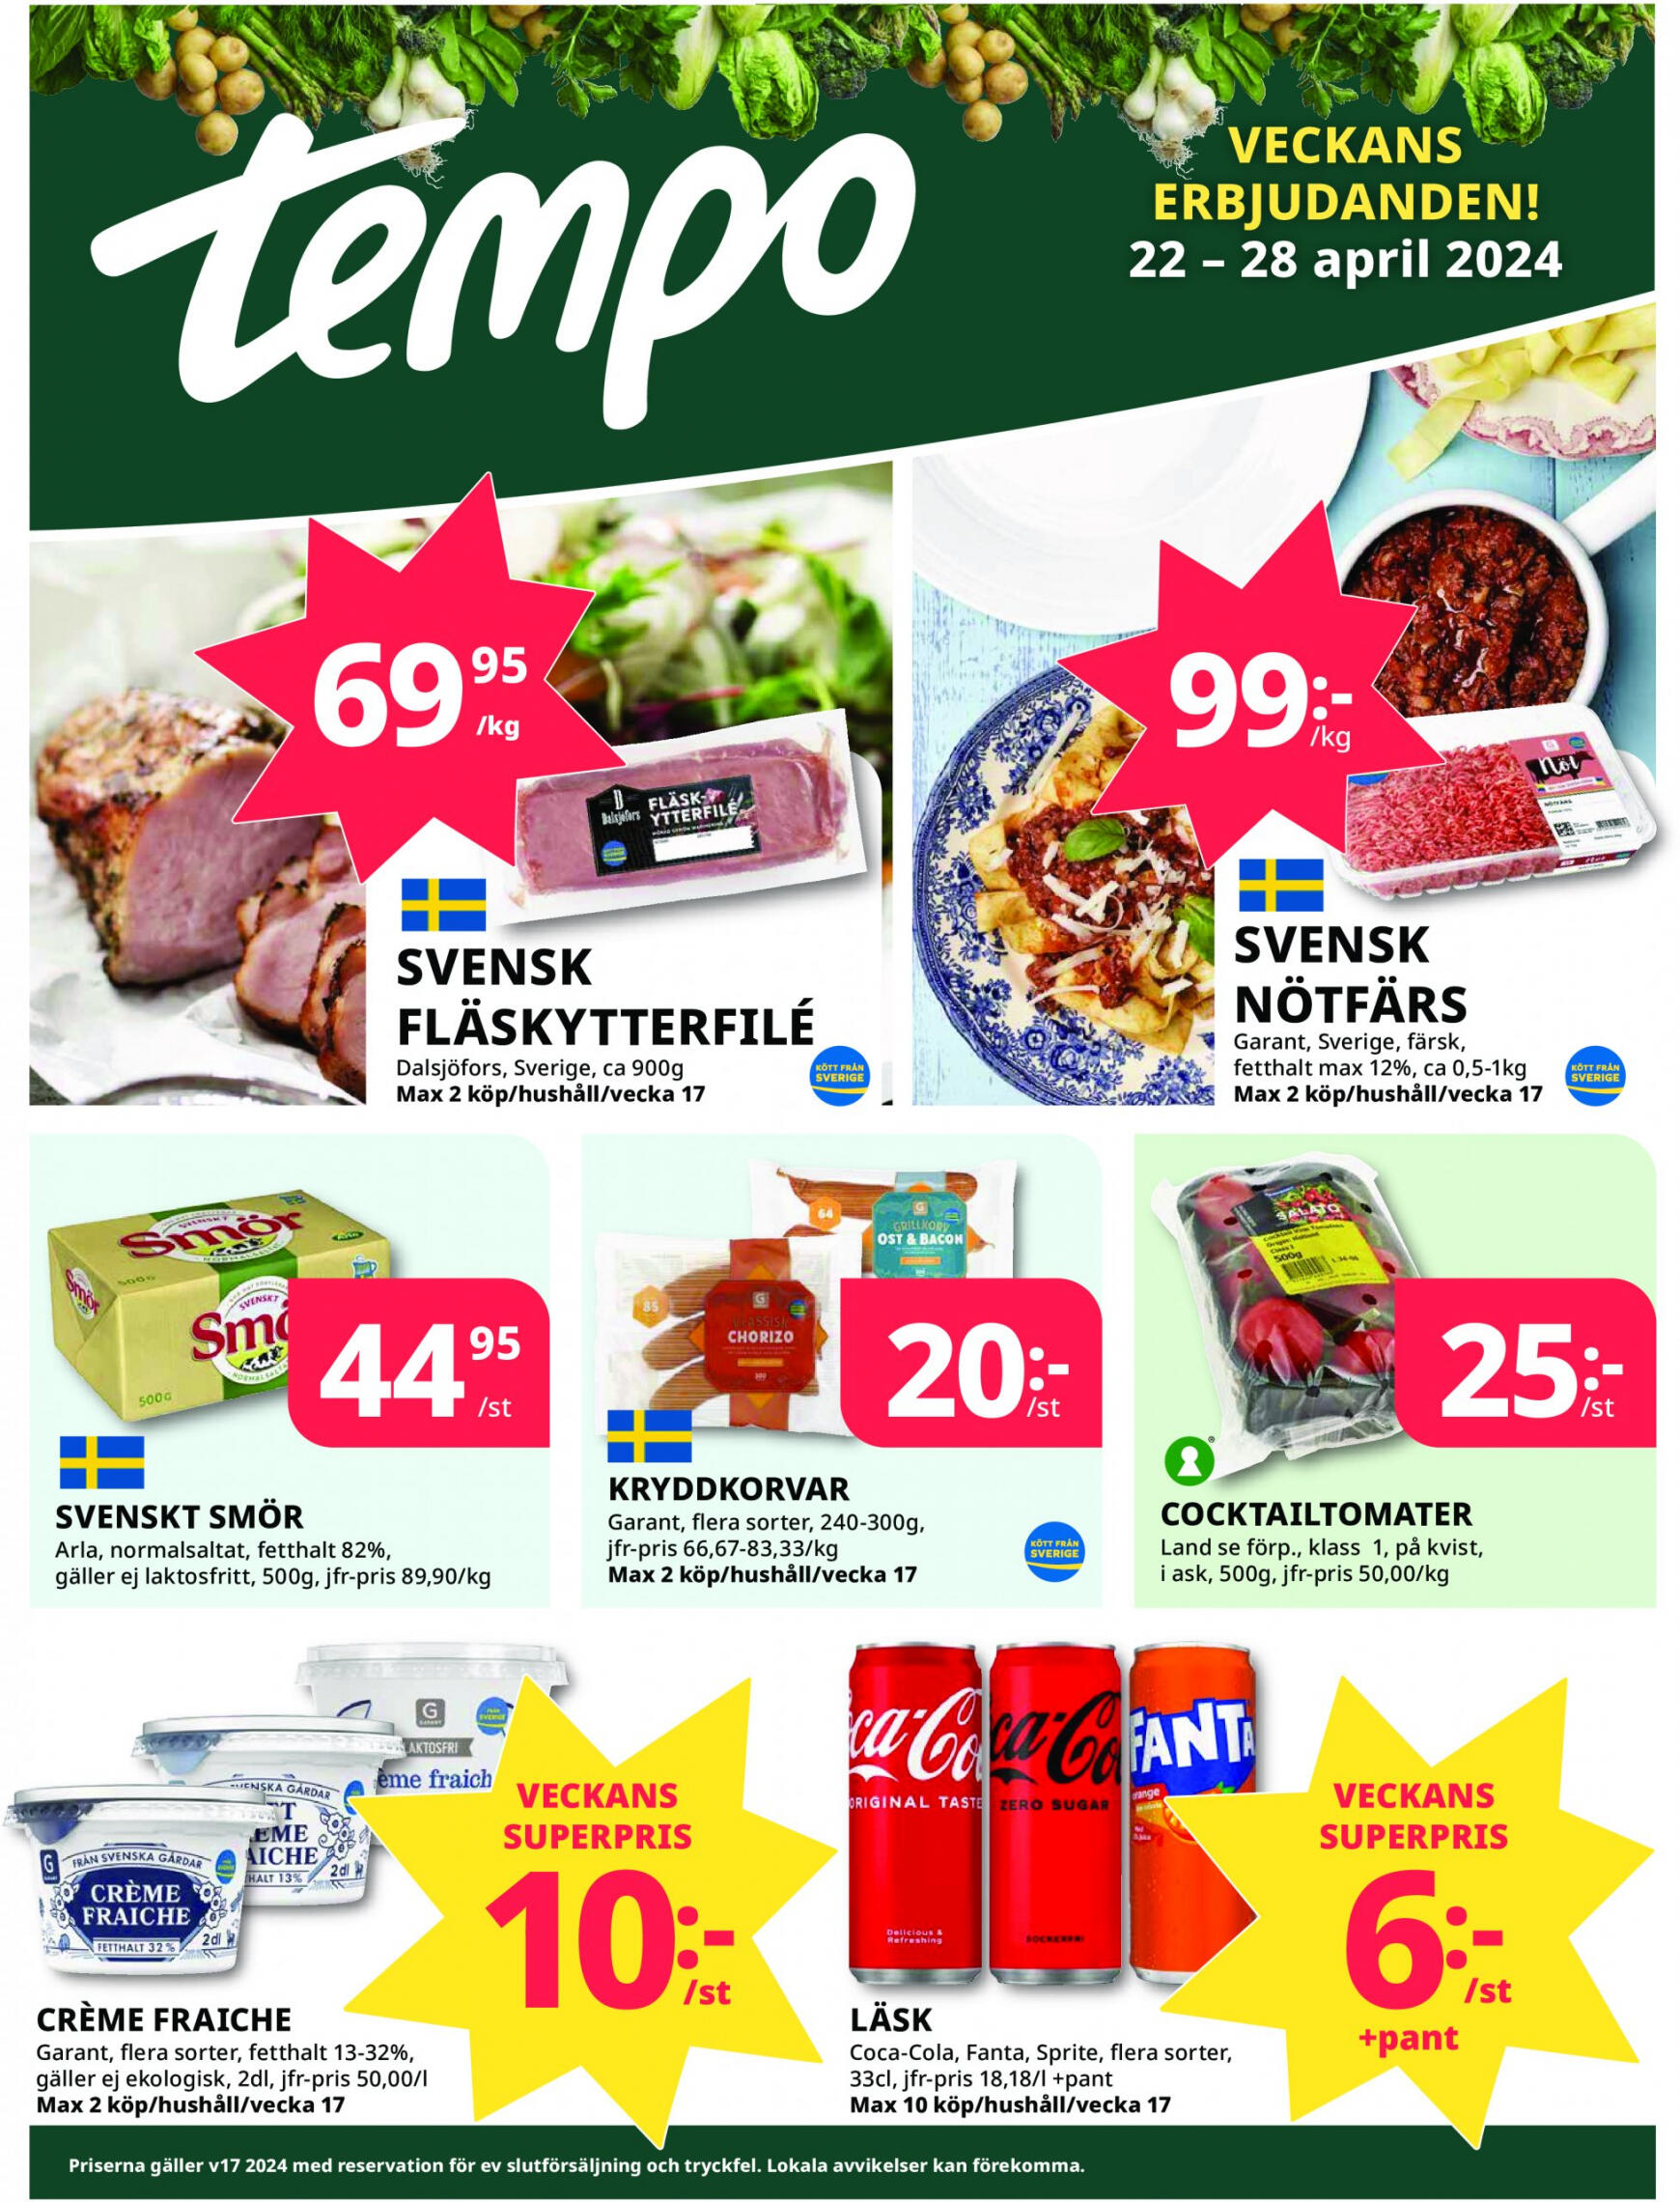 tempo - Flyer Tempo current 22.04. - 28.04. - page: 1